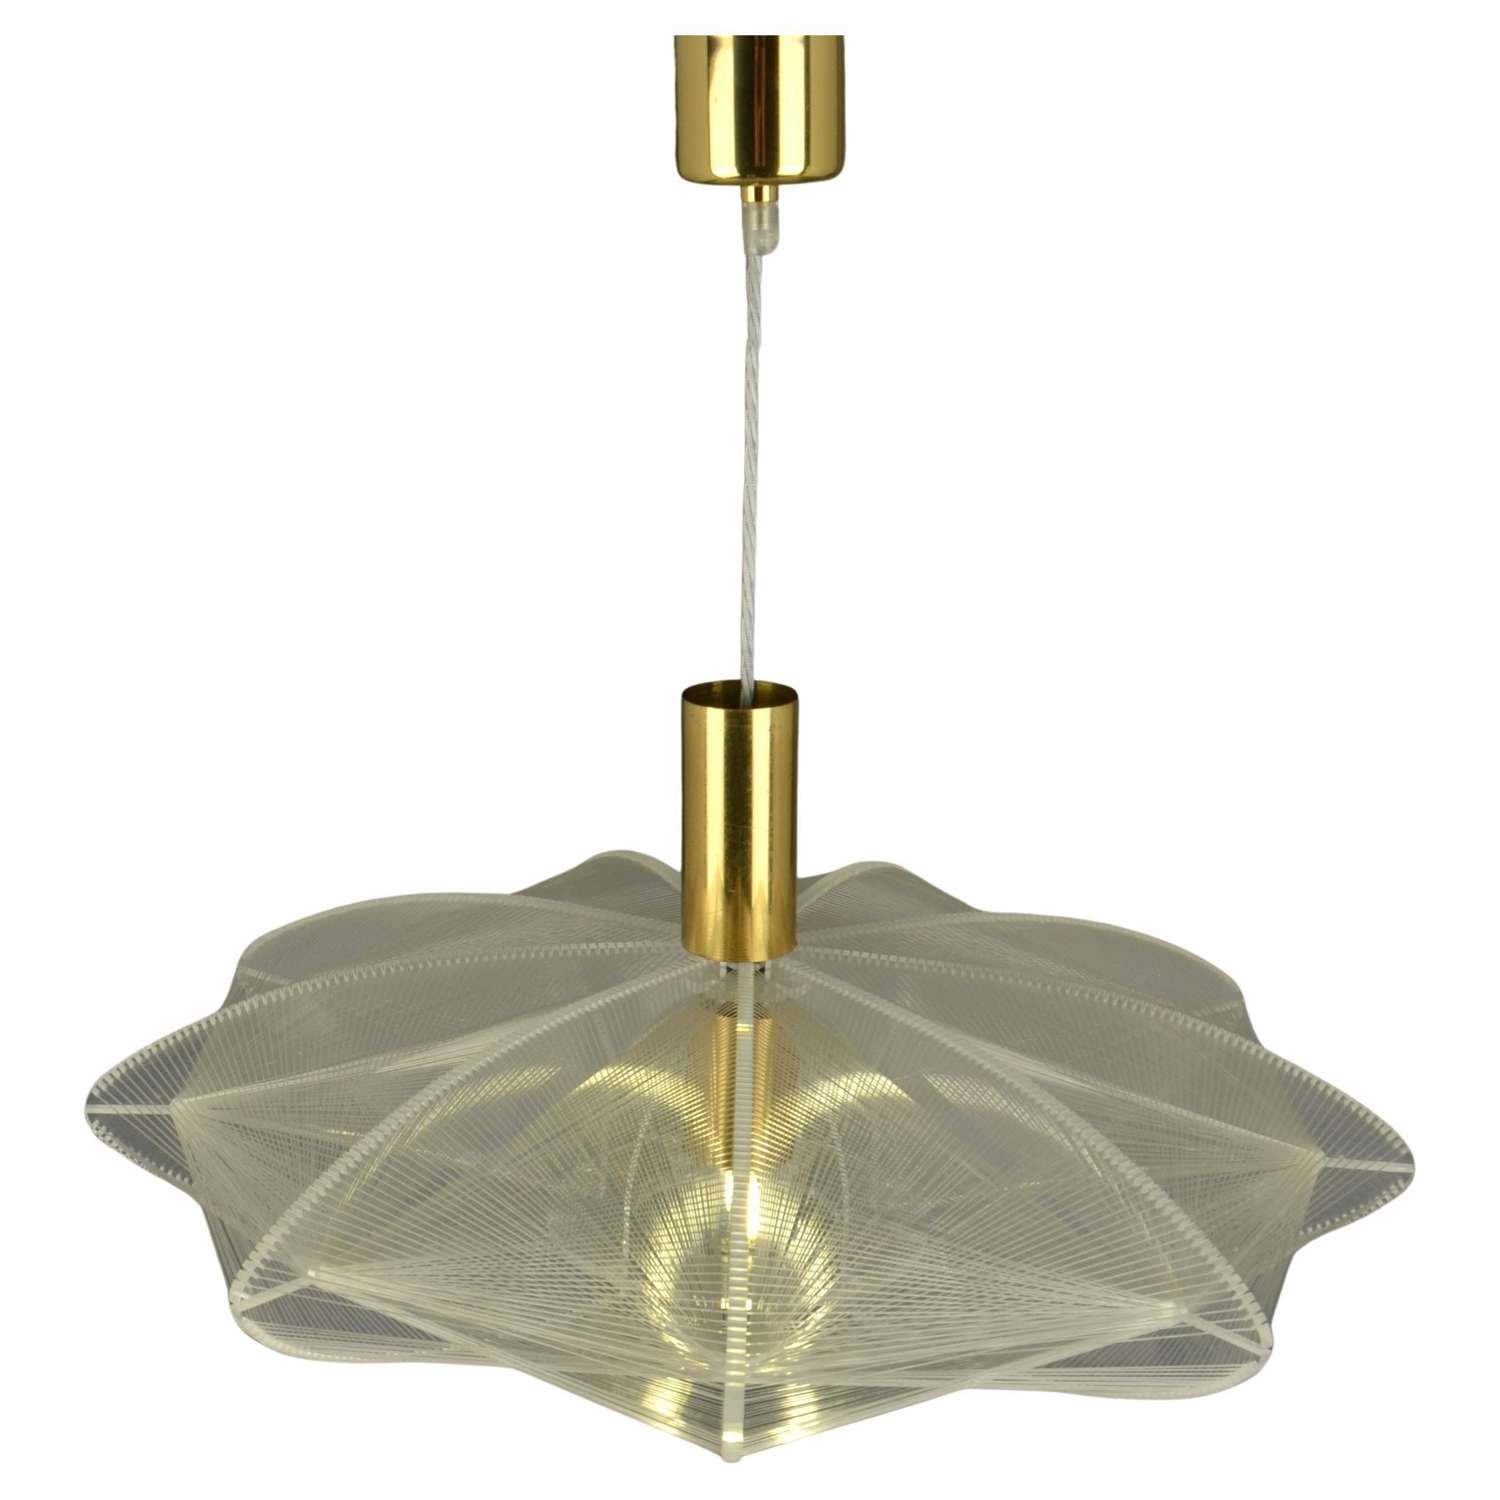 Mid Century Modern Pendant Lamp in Lucite, Wire and Brass